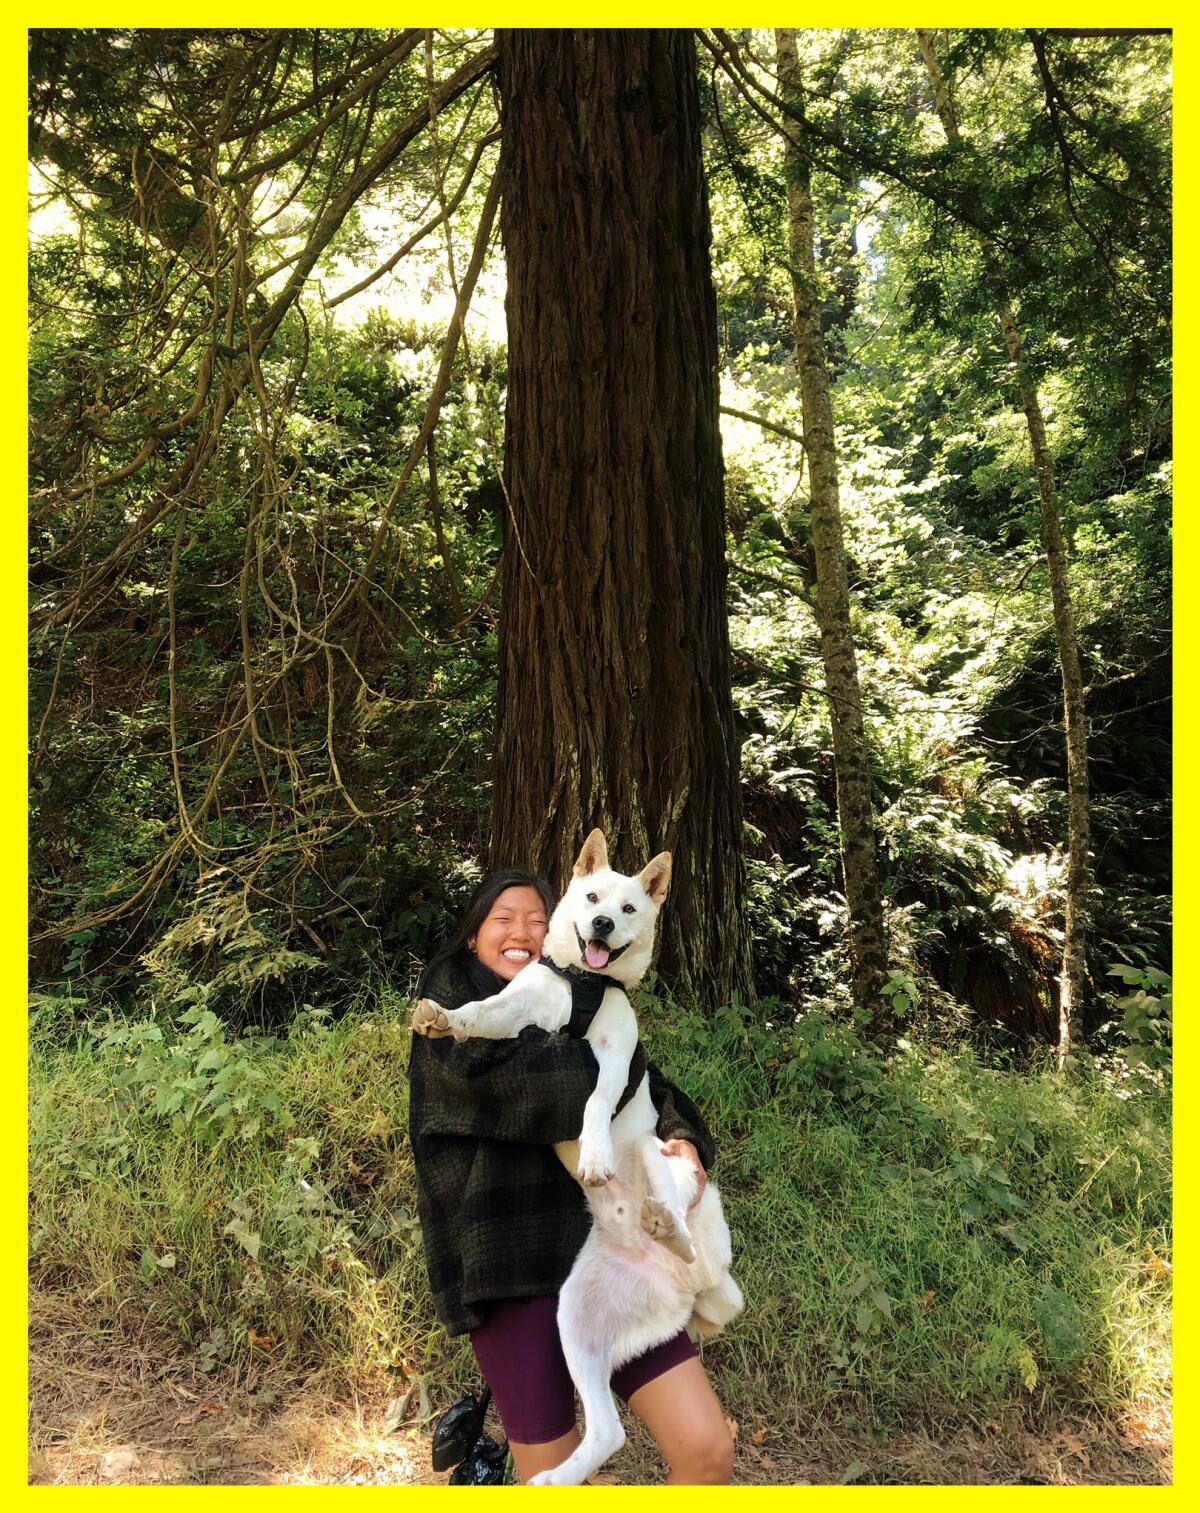 A woman holds her white dog in the outdoors. Both are smiling.